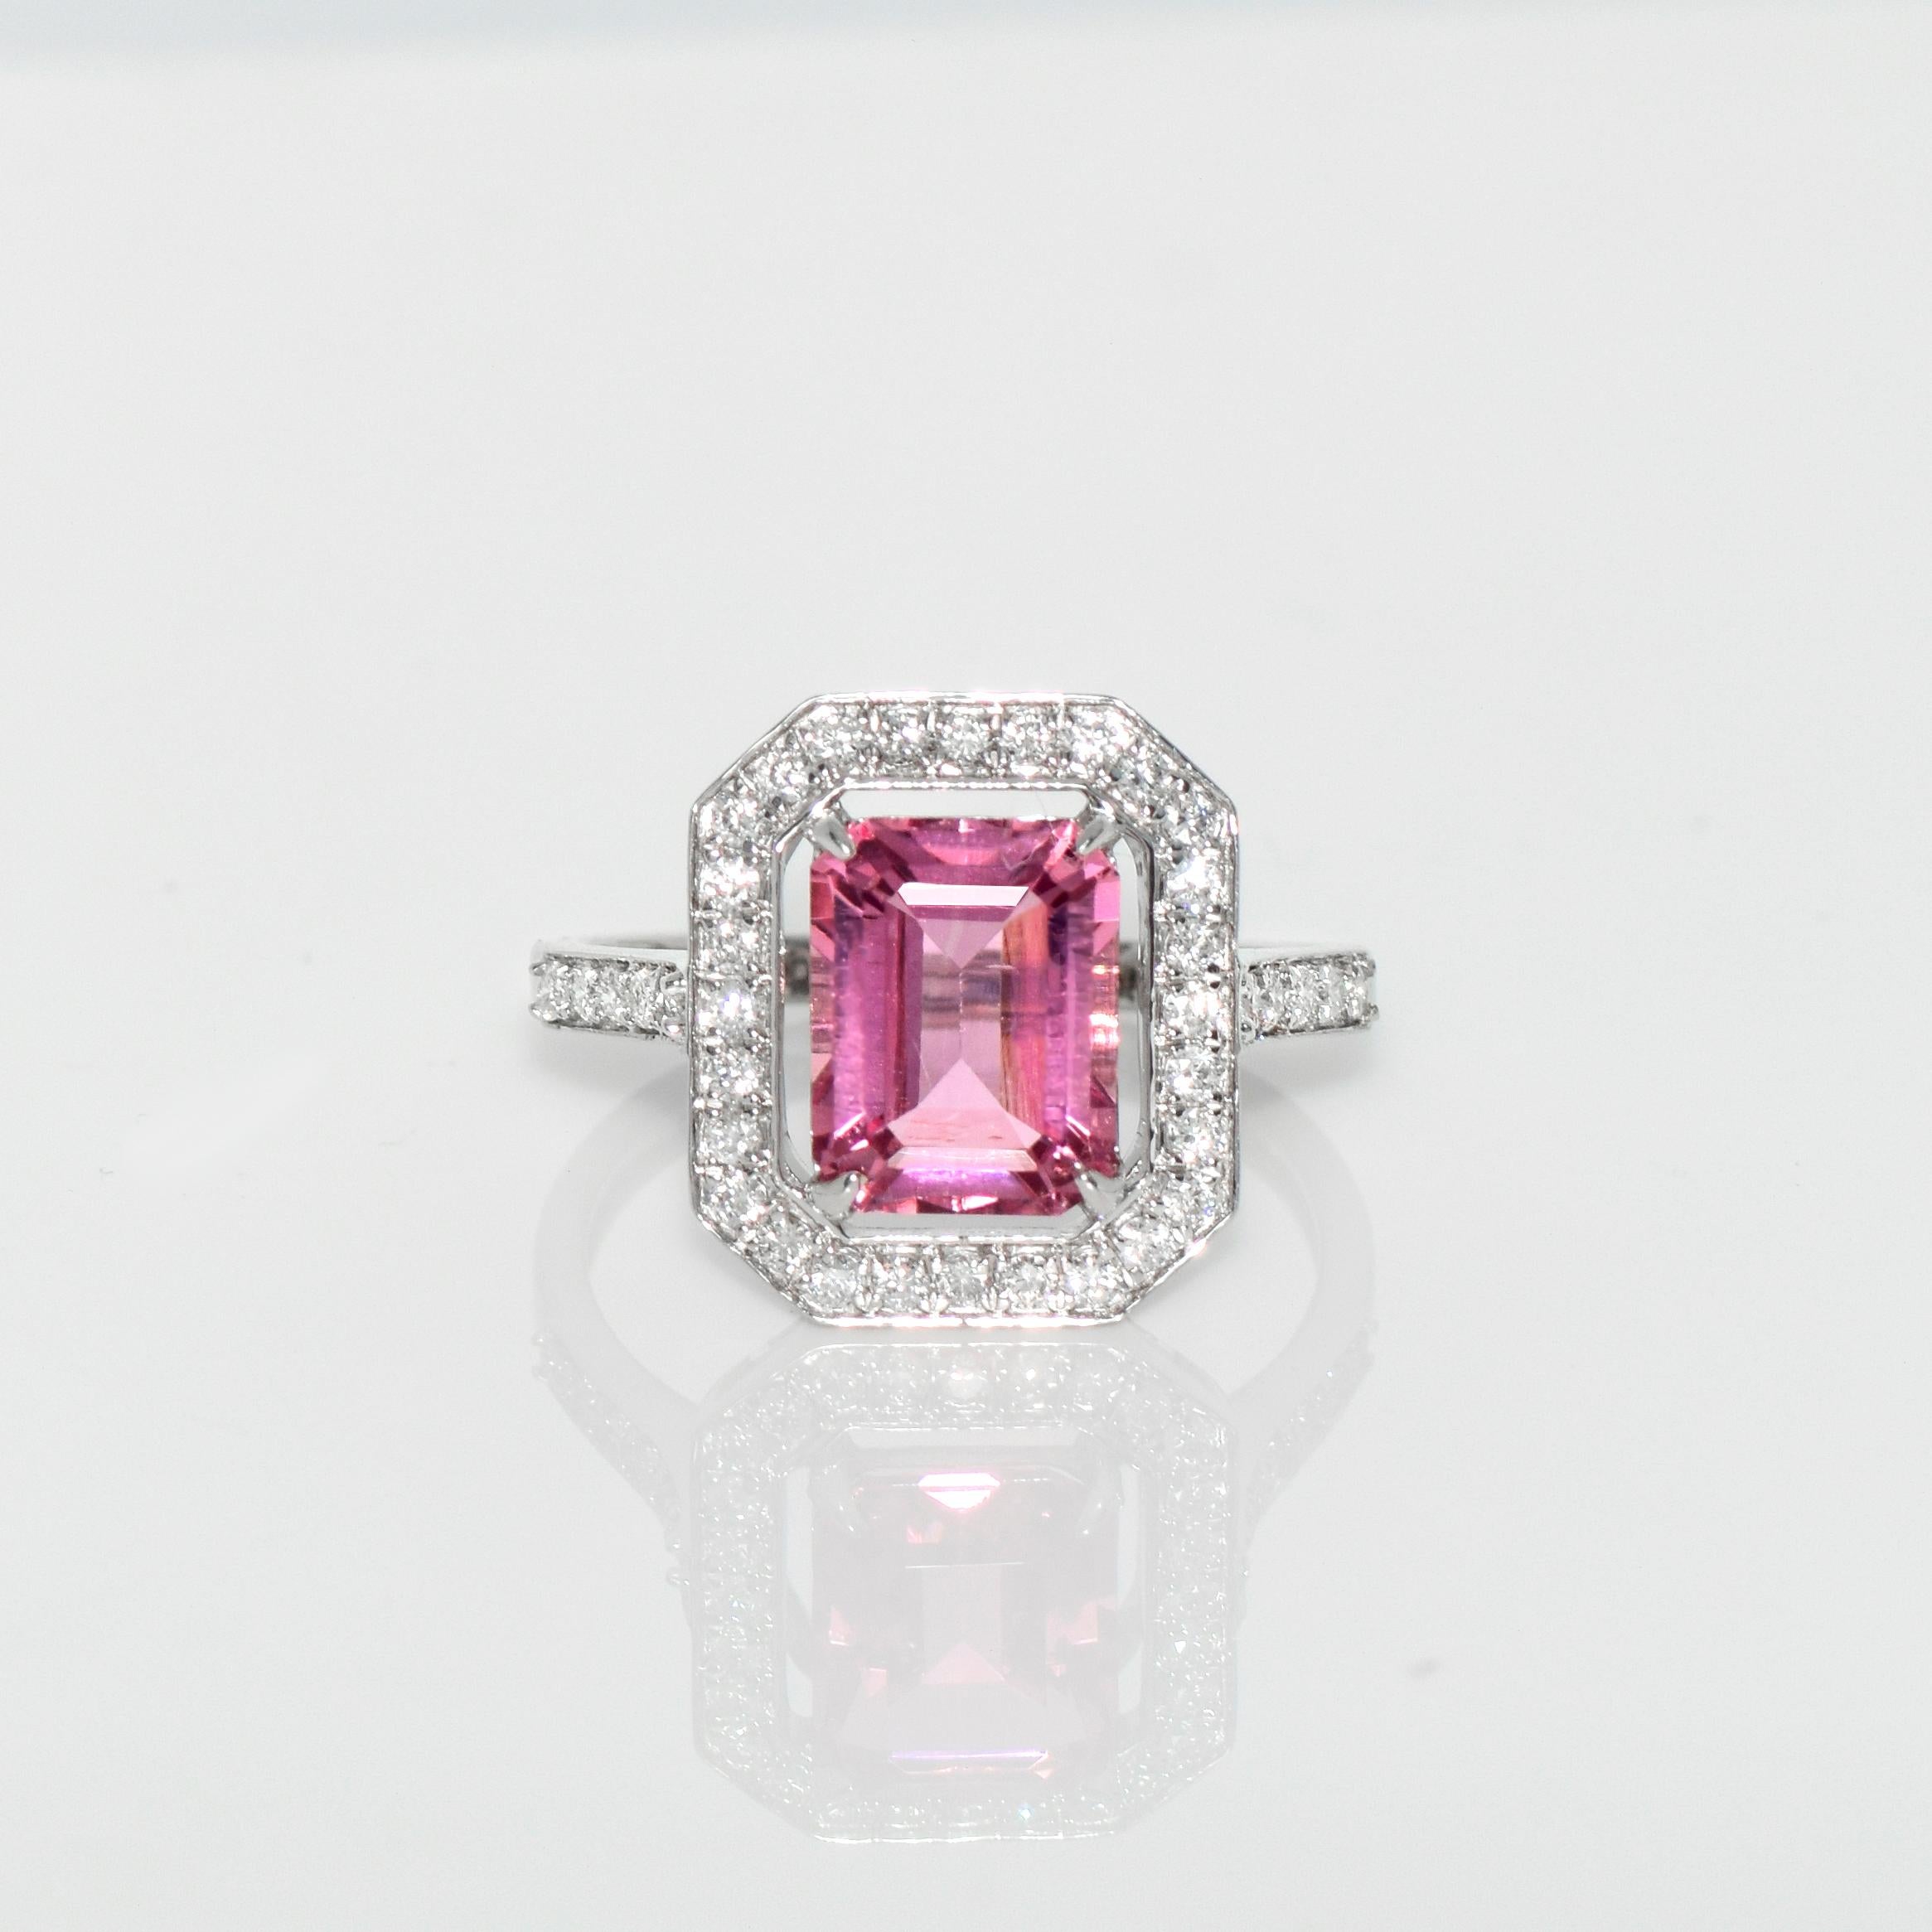 *IGI 14K 2.28 Ct Top Pink Tourmaline&Diamonds Engagement Ring*

Natural top pink Tourmaline weighing 2.28 ct set on 14K white gold pave' band with FG VS natural round brilliant cut diamonds weighing 0.35 ct.

The halo design with high-grade gems and